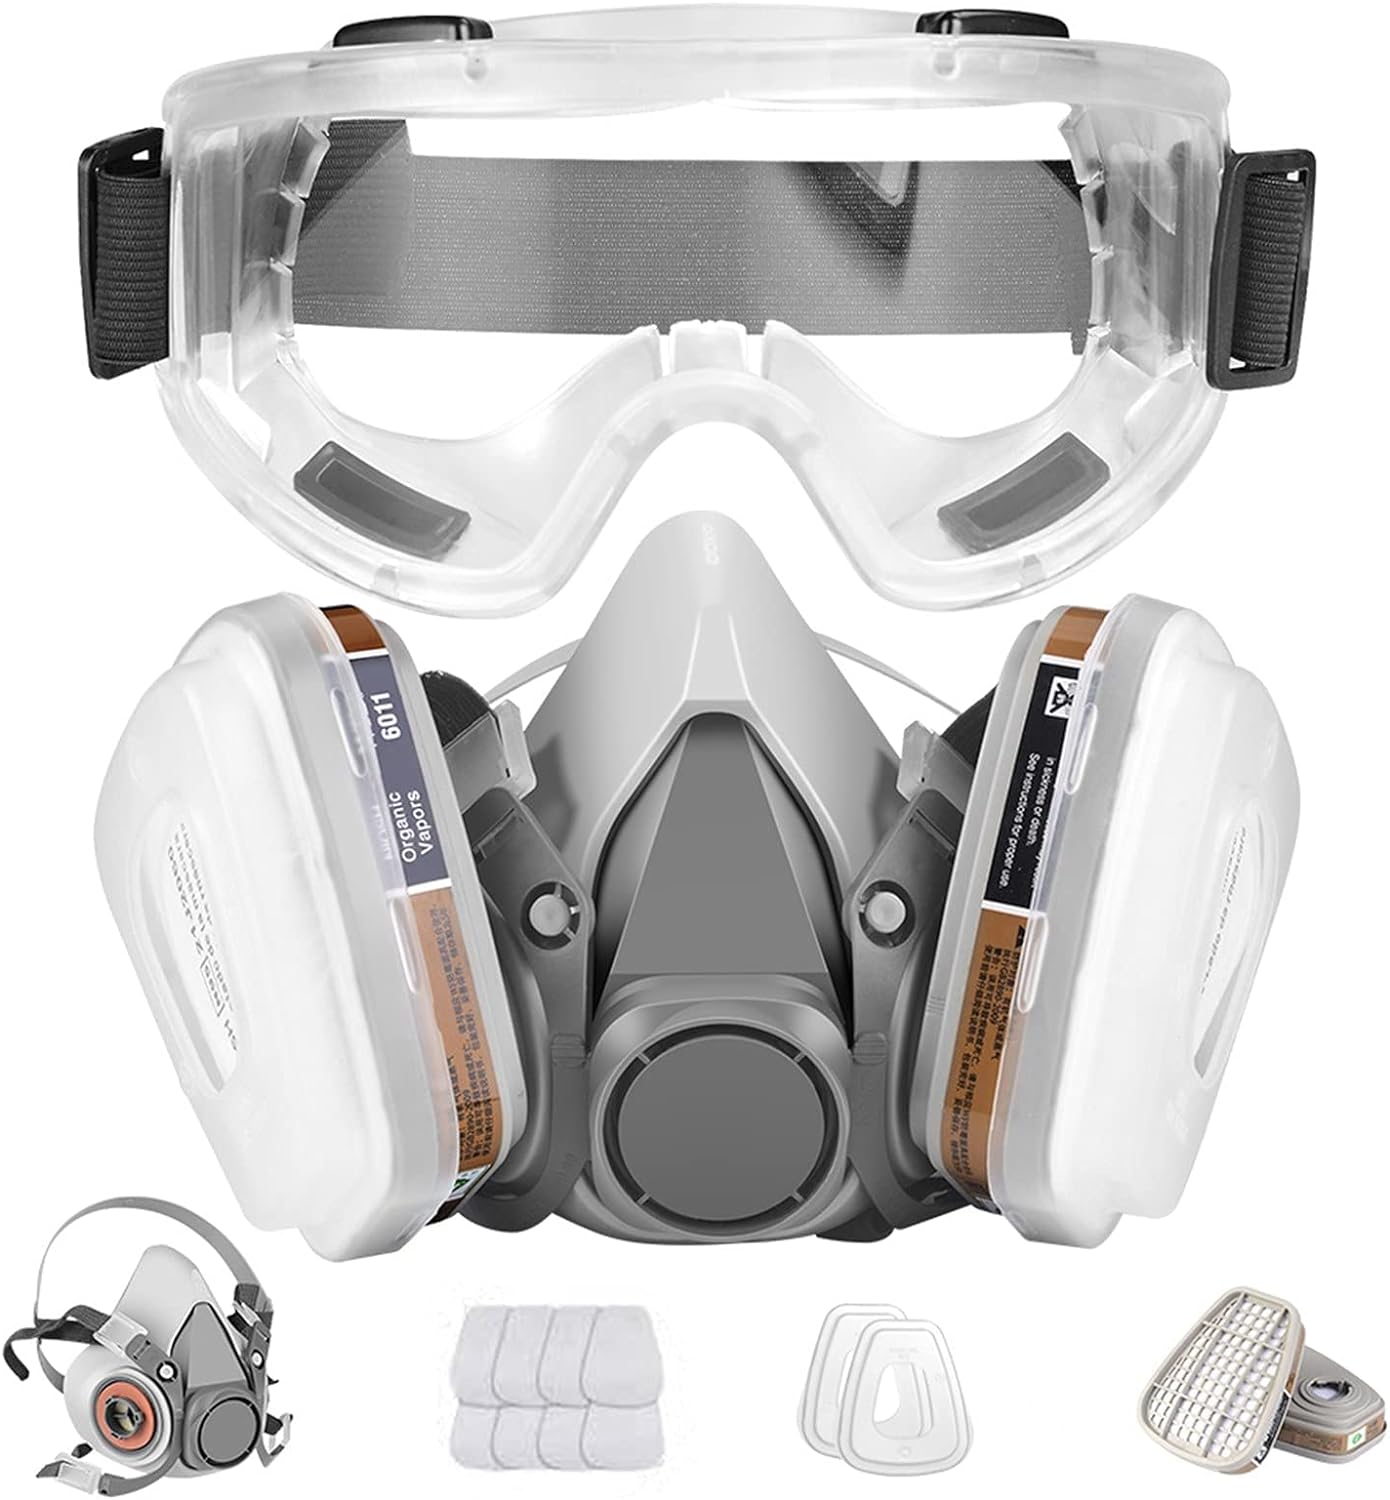 Limited-Time Promo! Respirator Mask - Special Discounts Available, Act Fast and Save Big!